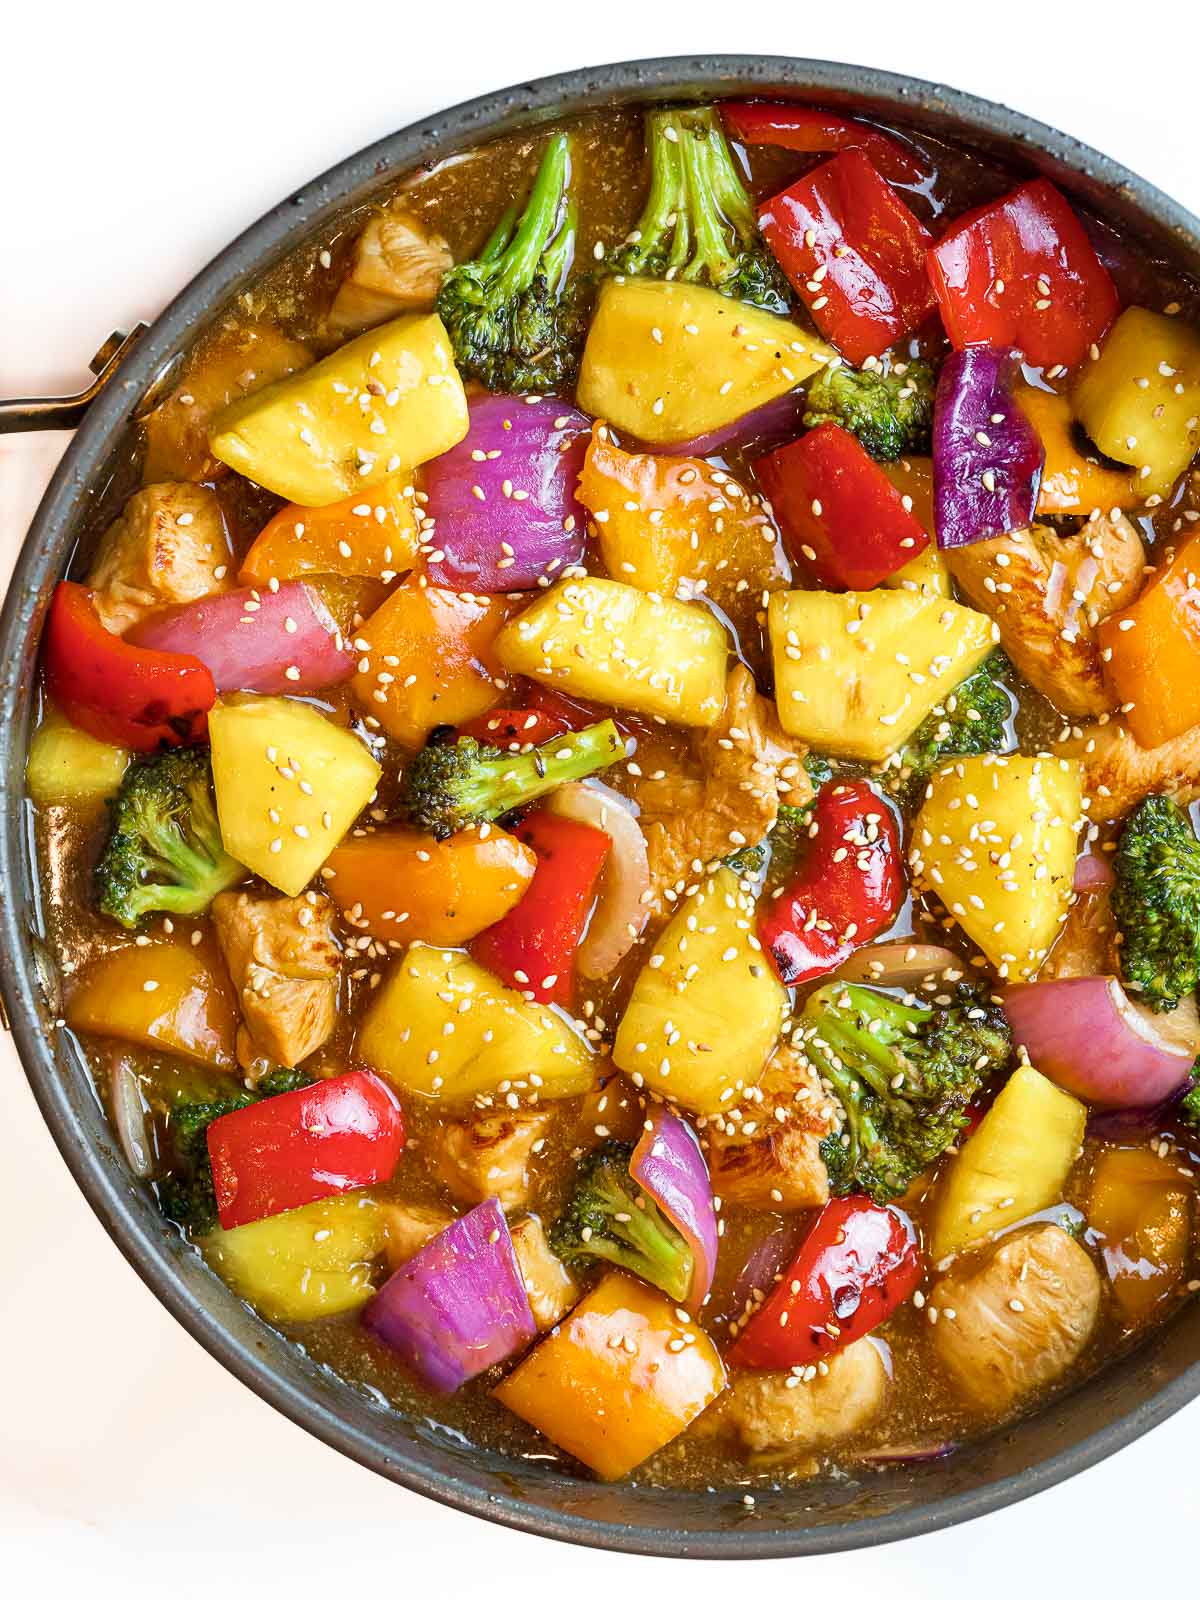 summer pineapple chicken stir fry with tangy teriyaki sauce and vegetables